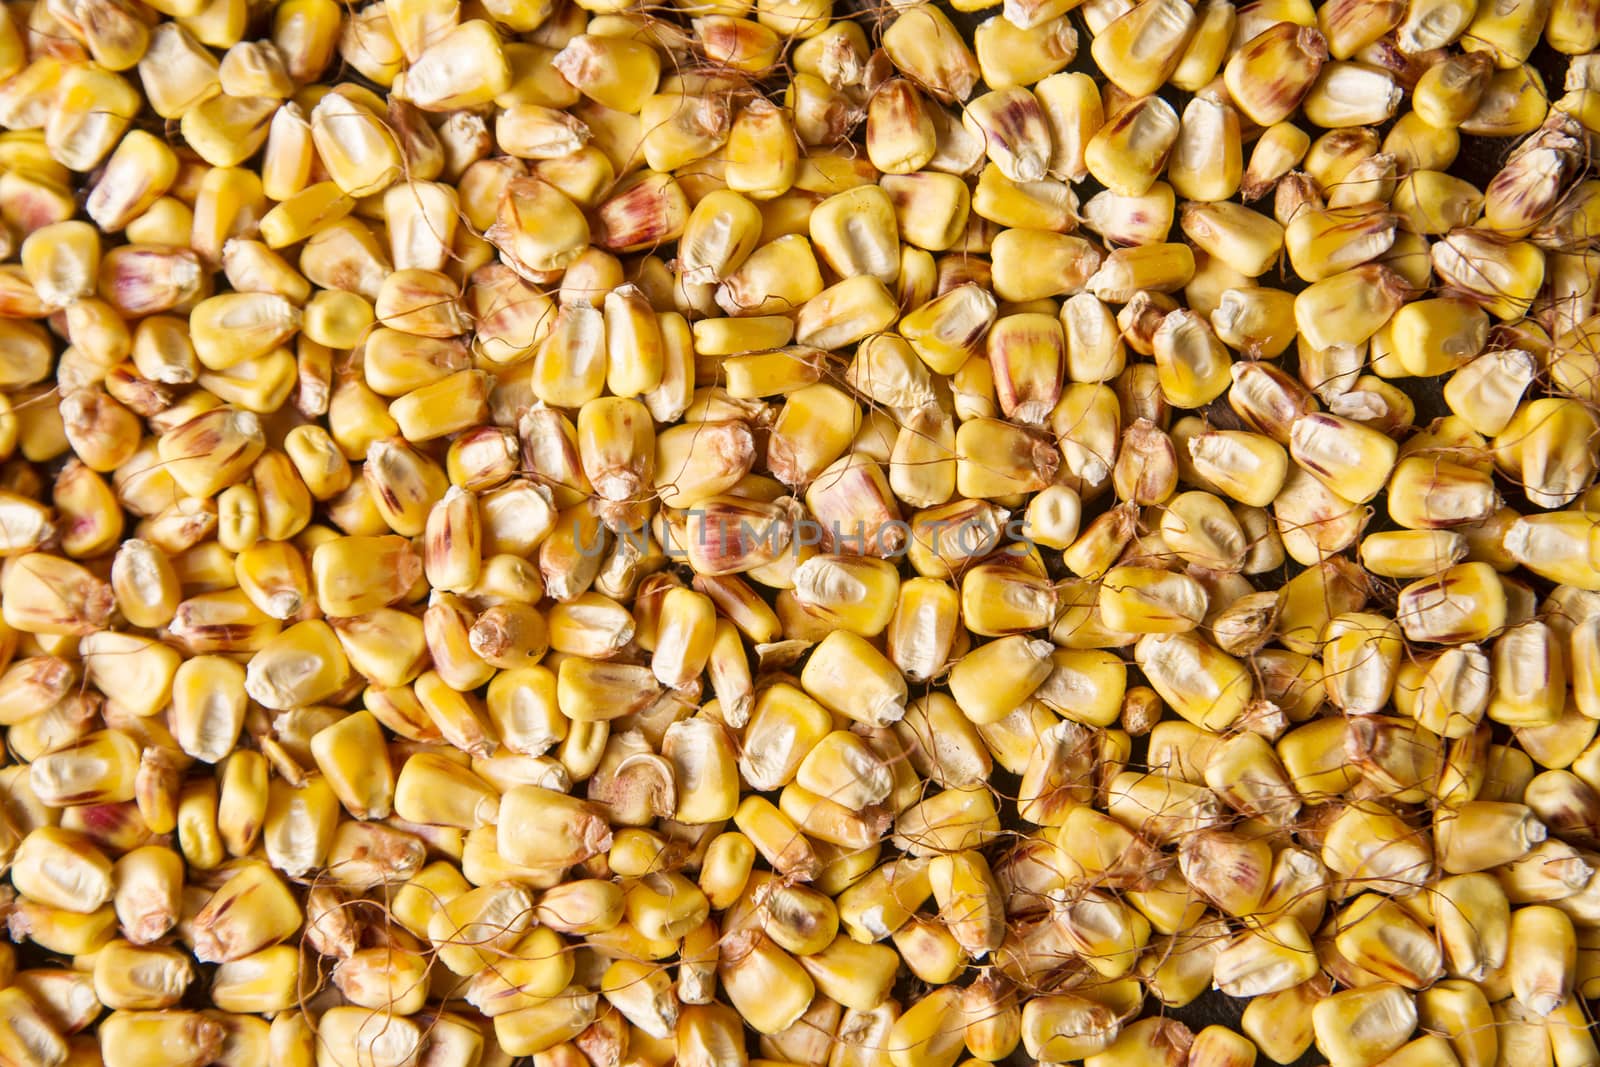 Representation of dried corn kernels ready for grinding